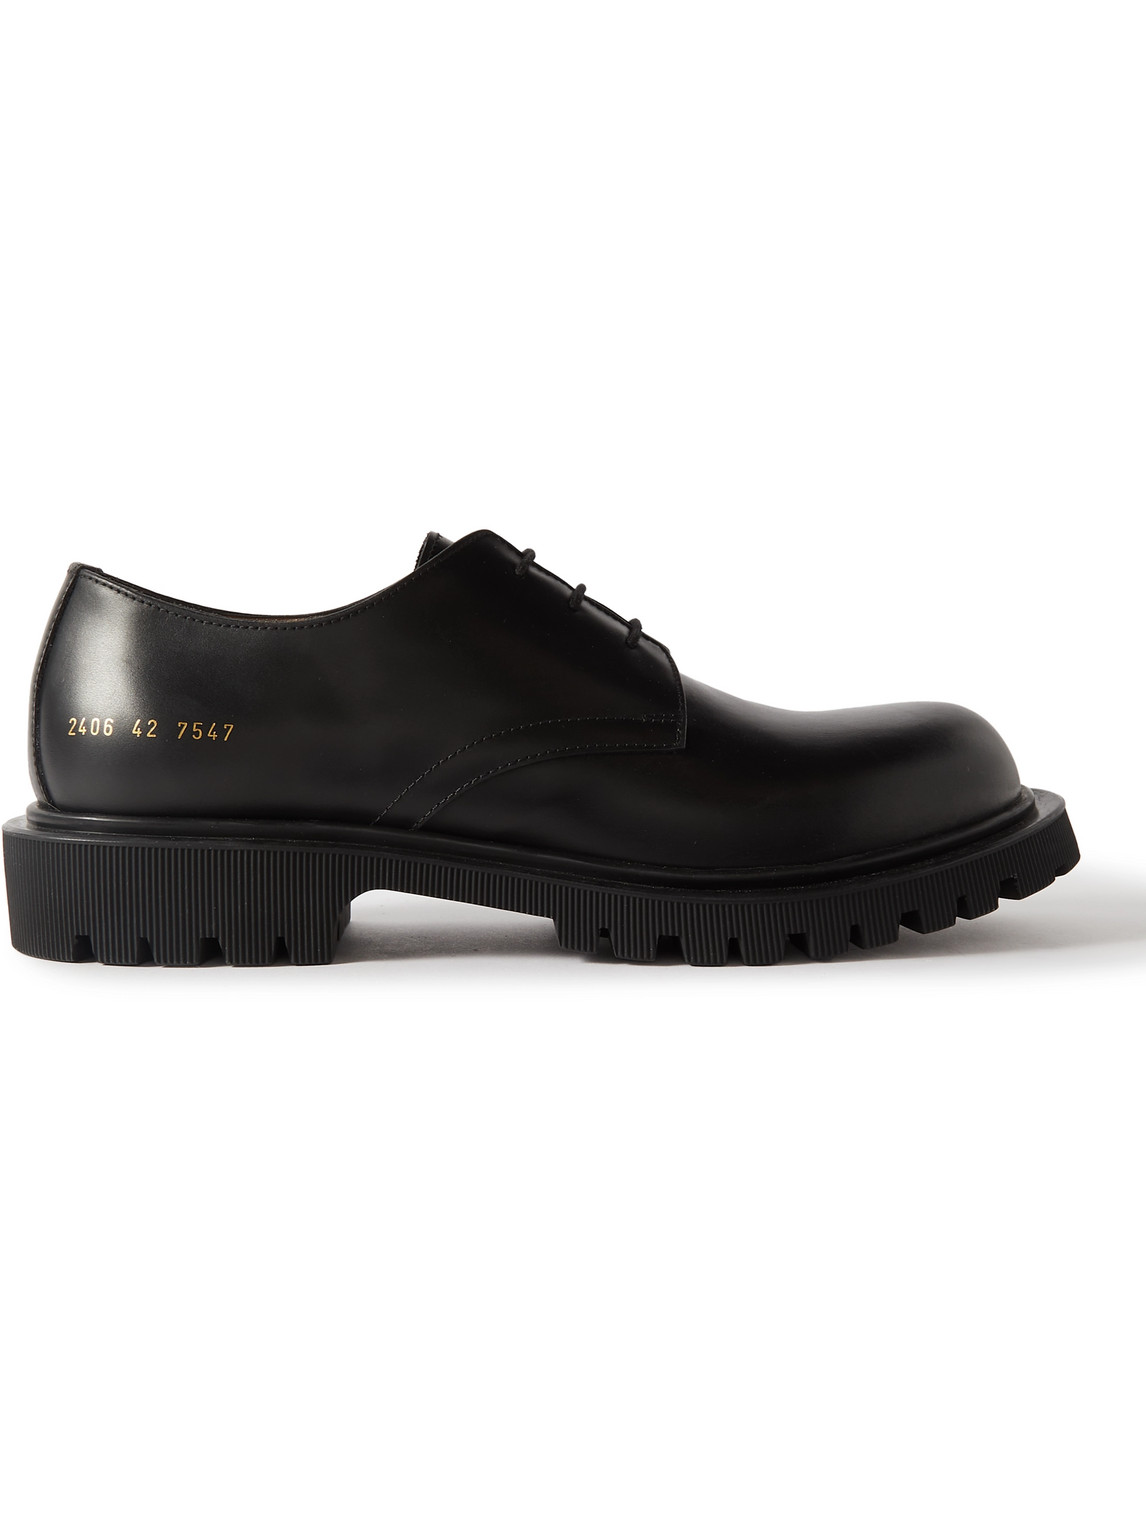 COMMON PROJECTS LEATHER DERBY SHOES